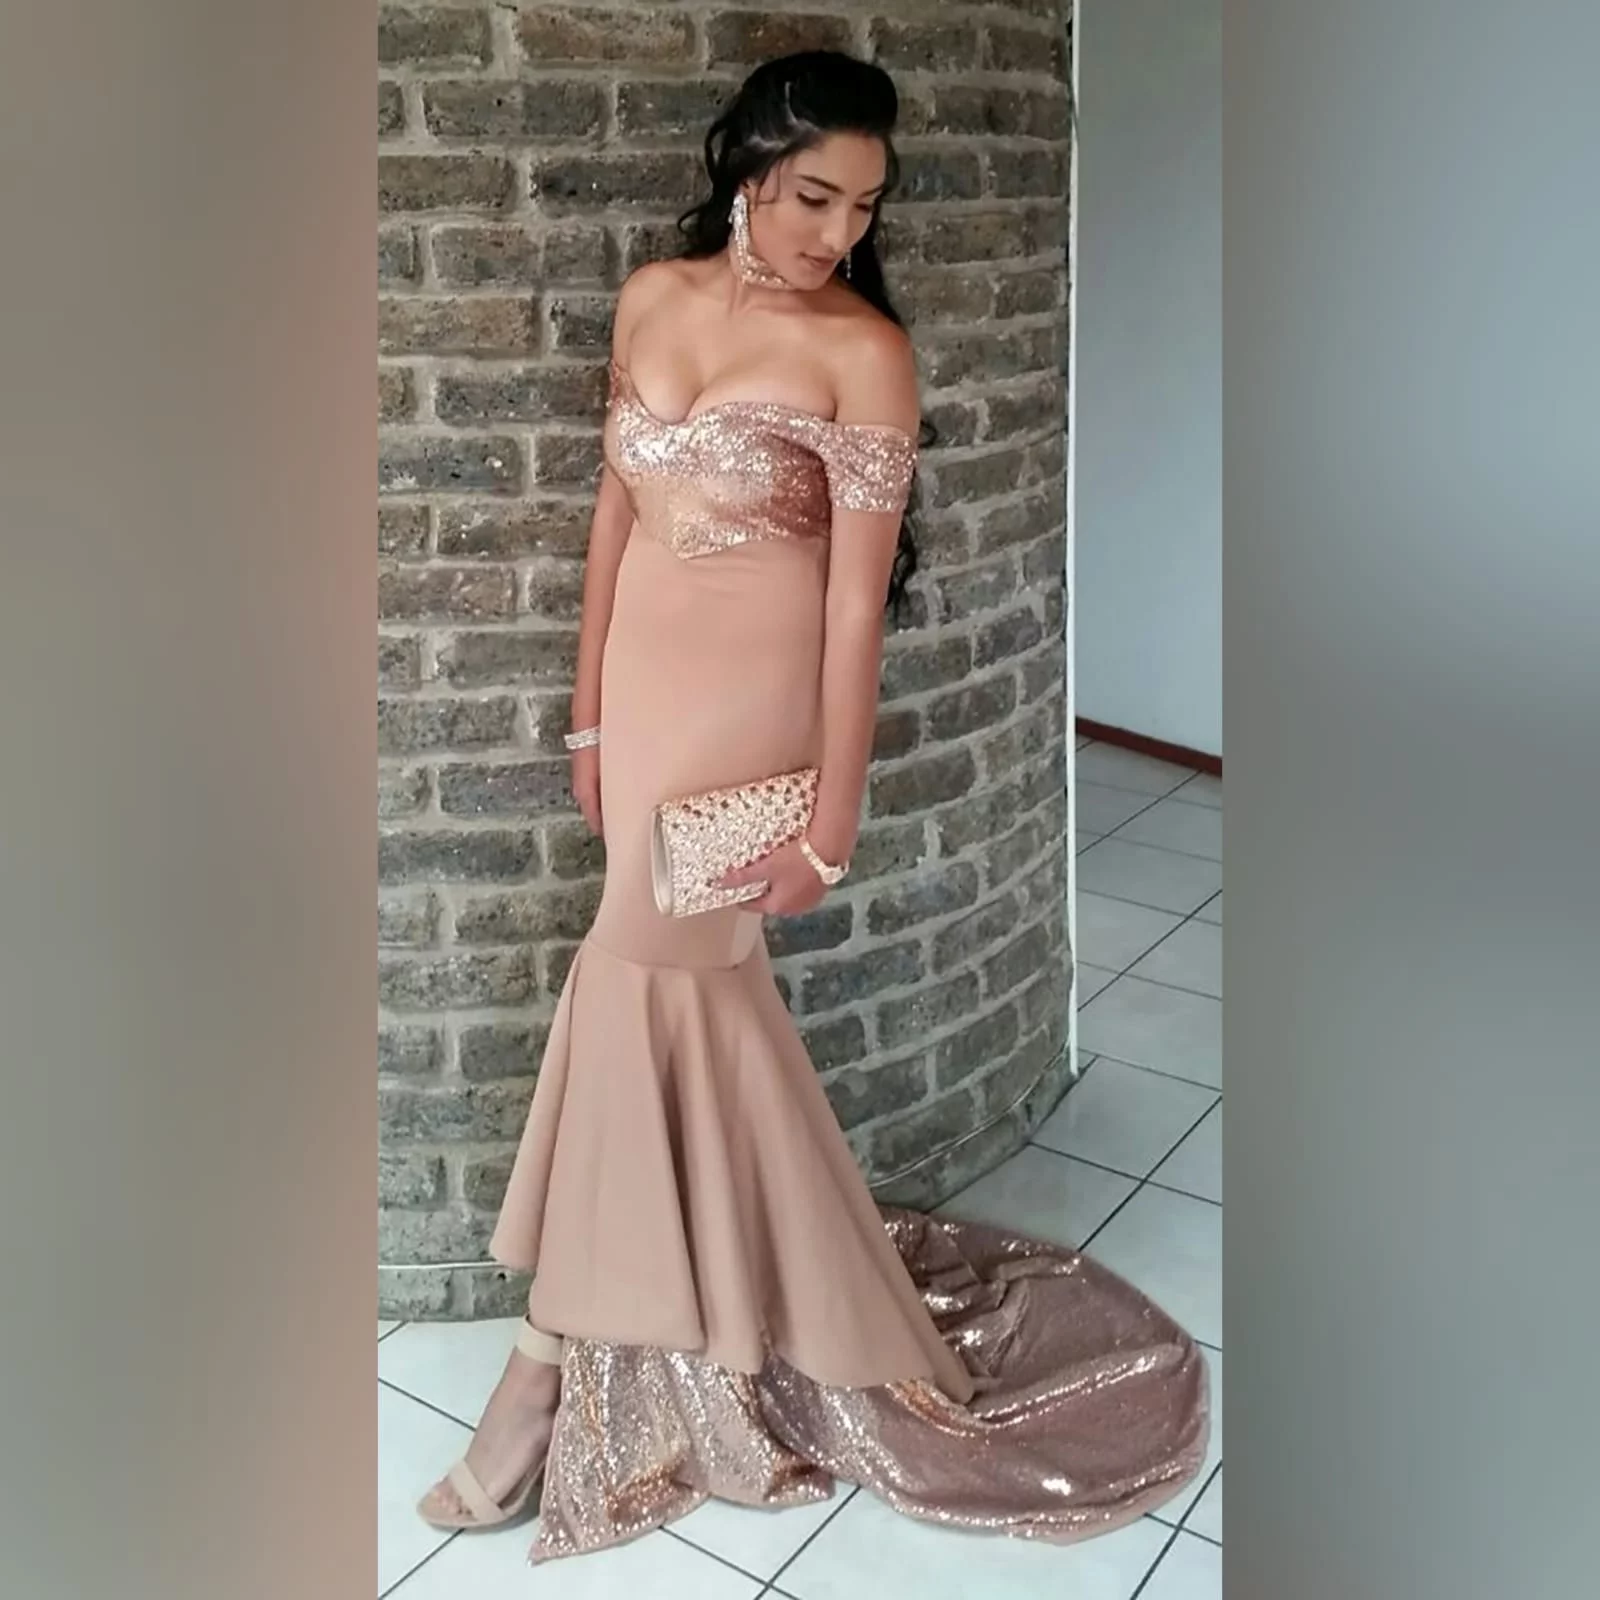 Rose gold 2 tone mermaid prom dress 4 rose gold 2 tone mermaid prom dress, off-shoulder dress with a sweetheart neckline and off-shoulder short sleeves. Double layer from knee down, with sequins, creating a train with a slit int the front middle. Comes with a matching choker.